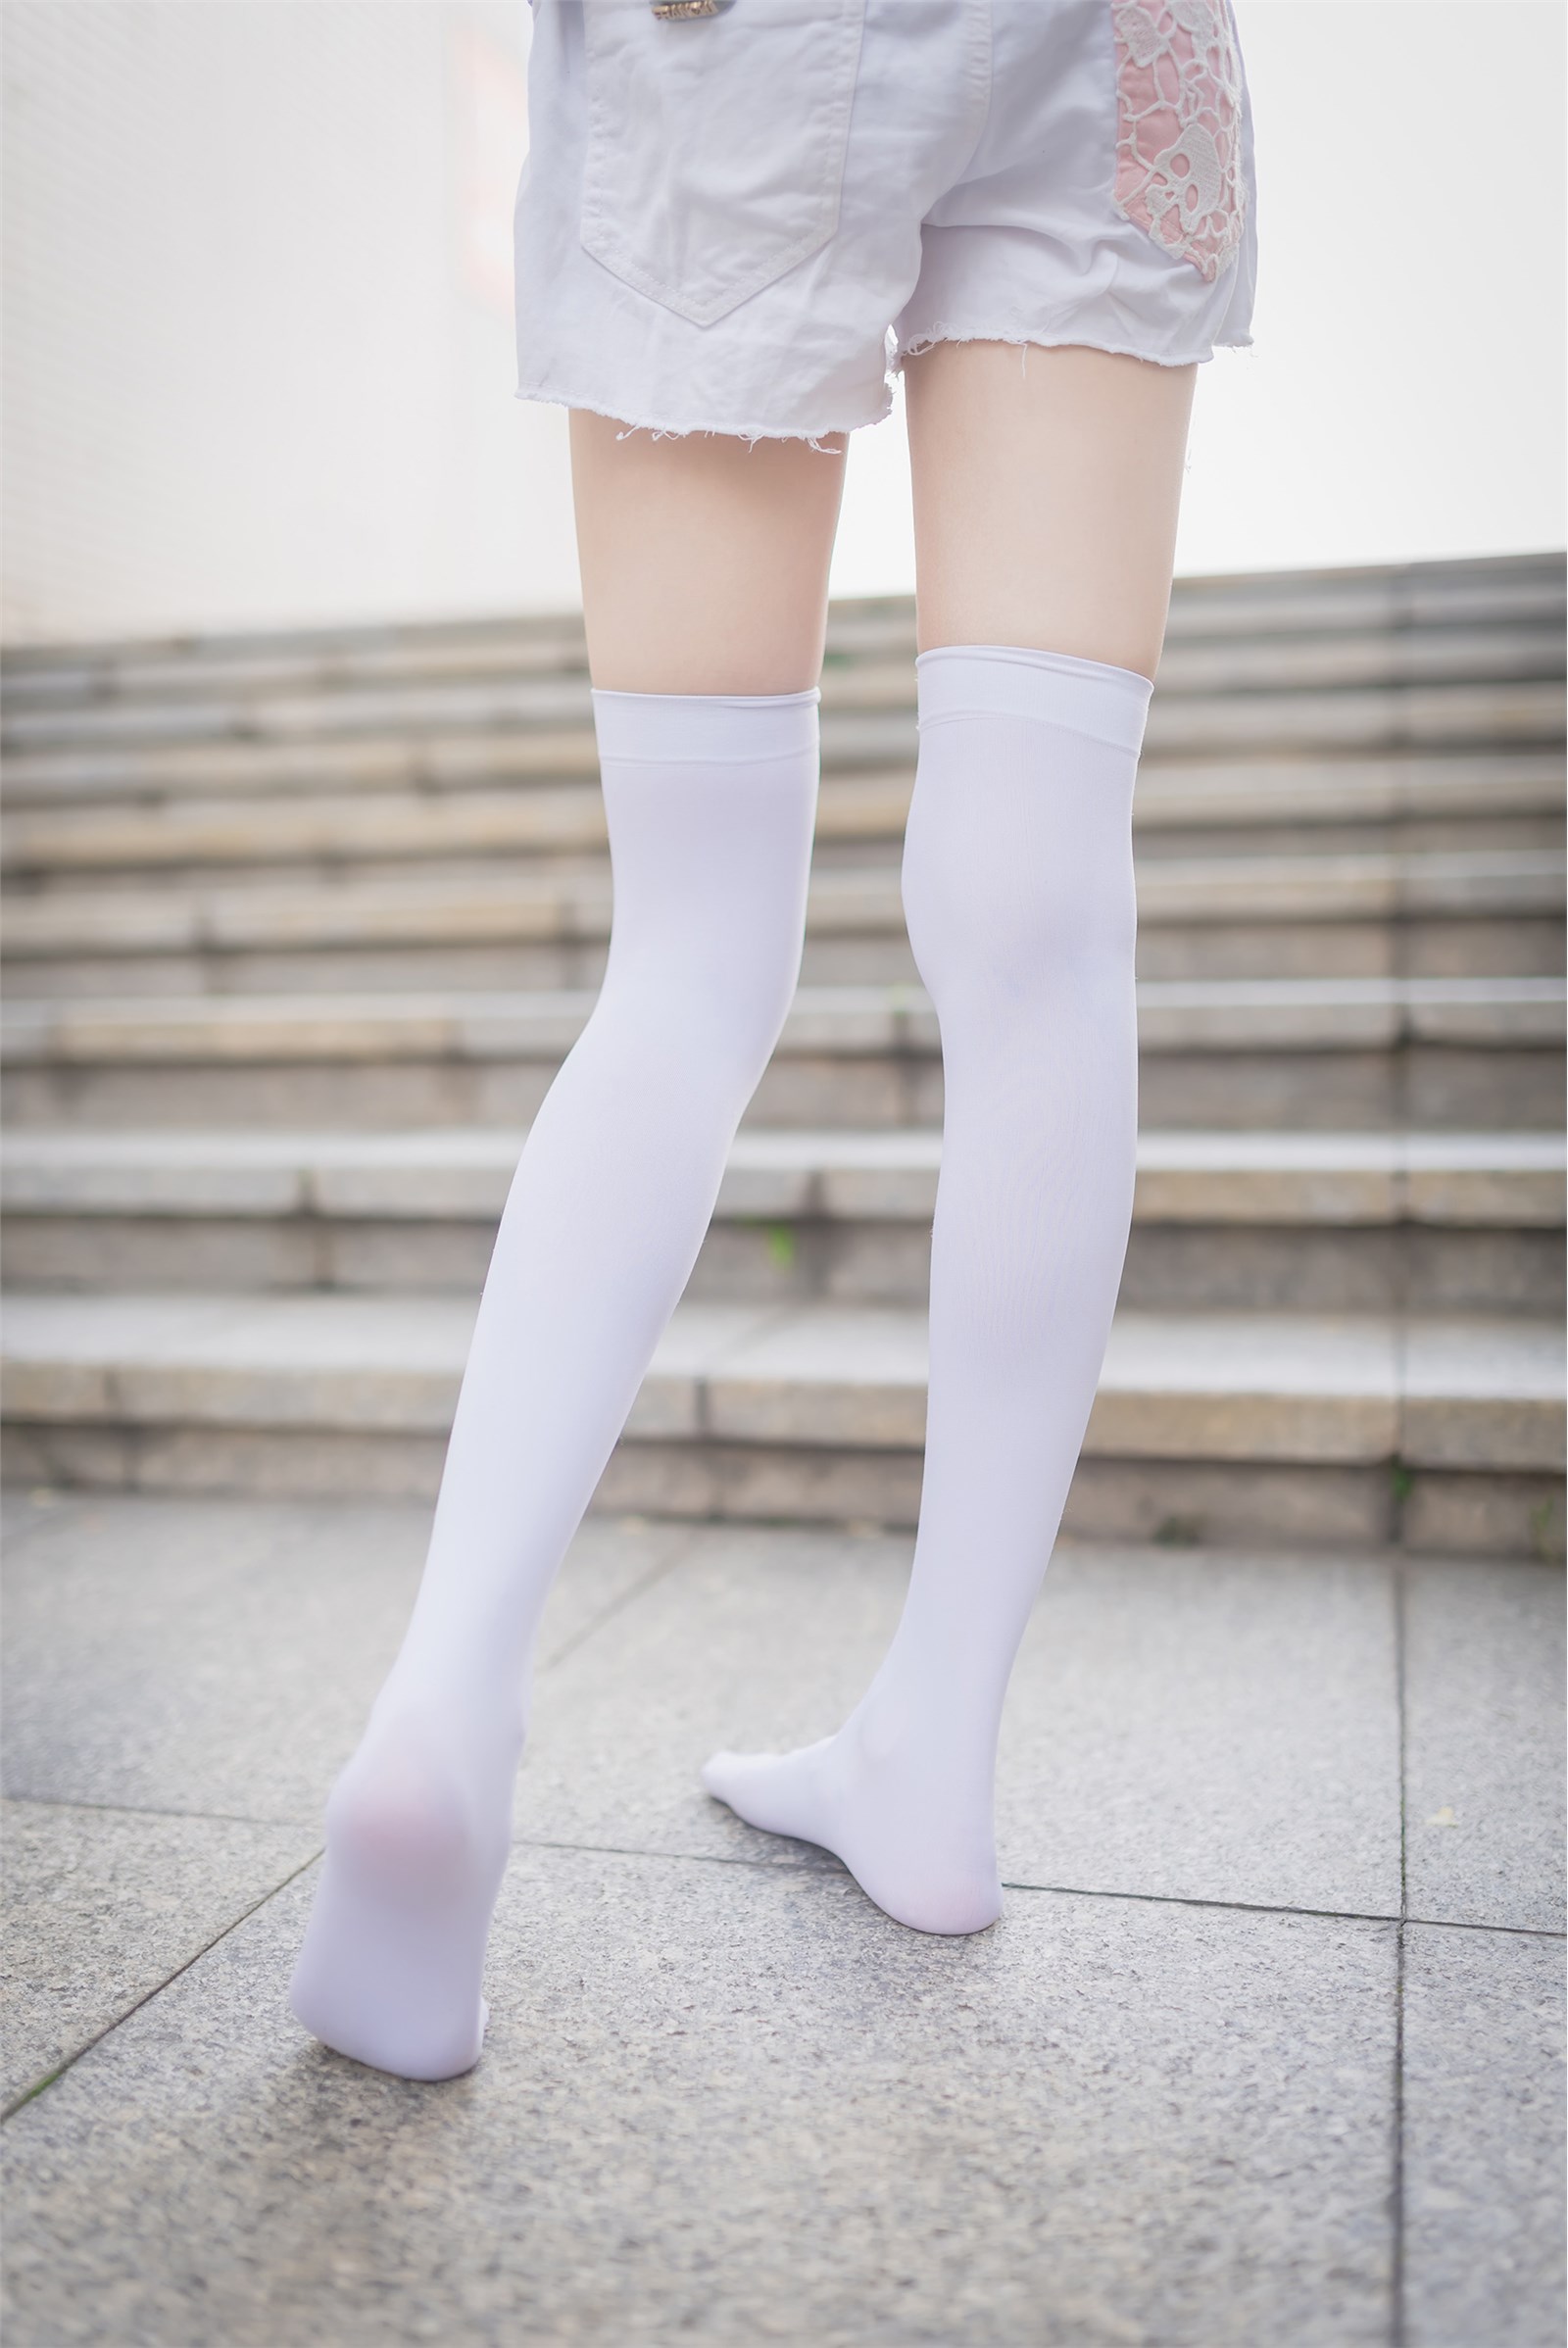 Rabbit plays with painted white stockings over the knee(37)